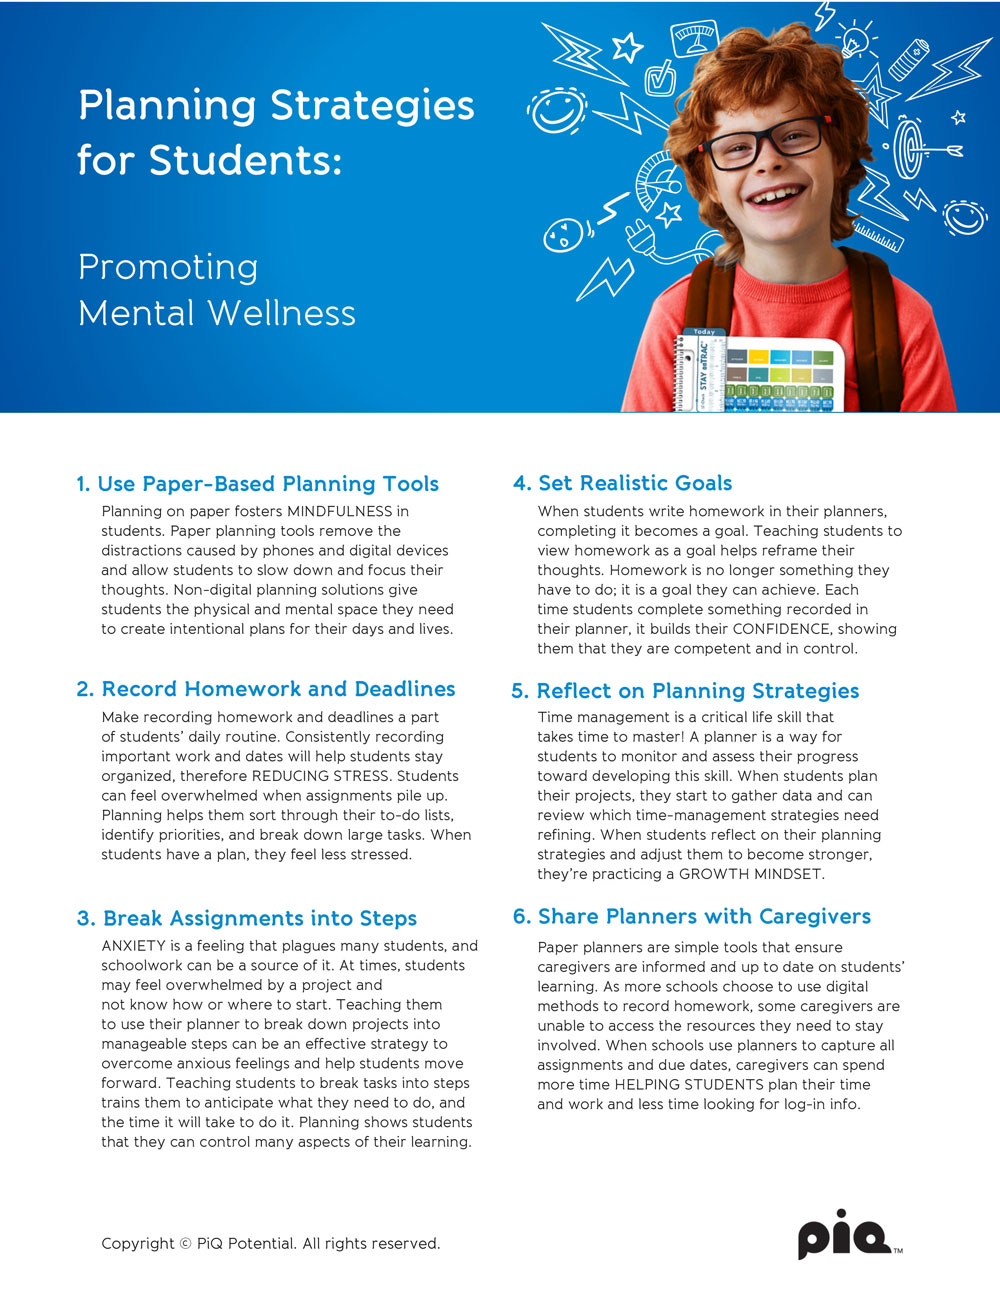 Planning Strategies for Students: Promoting Mental Wellness